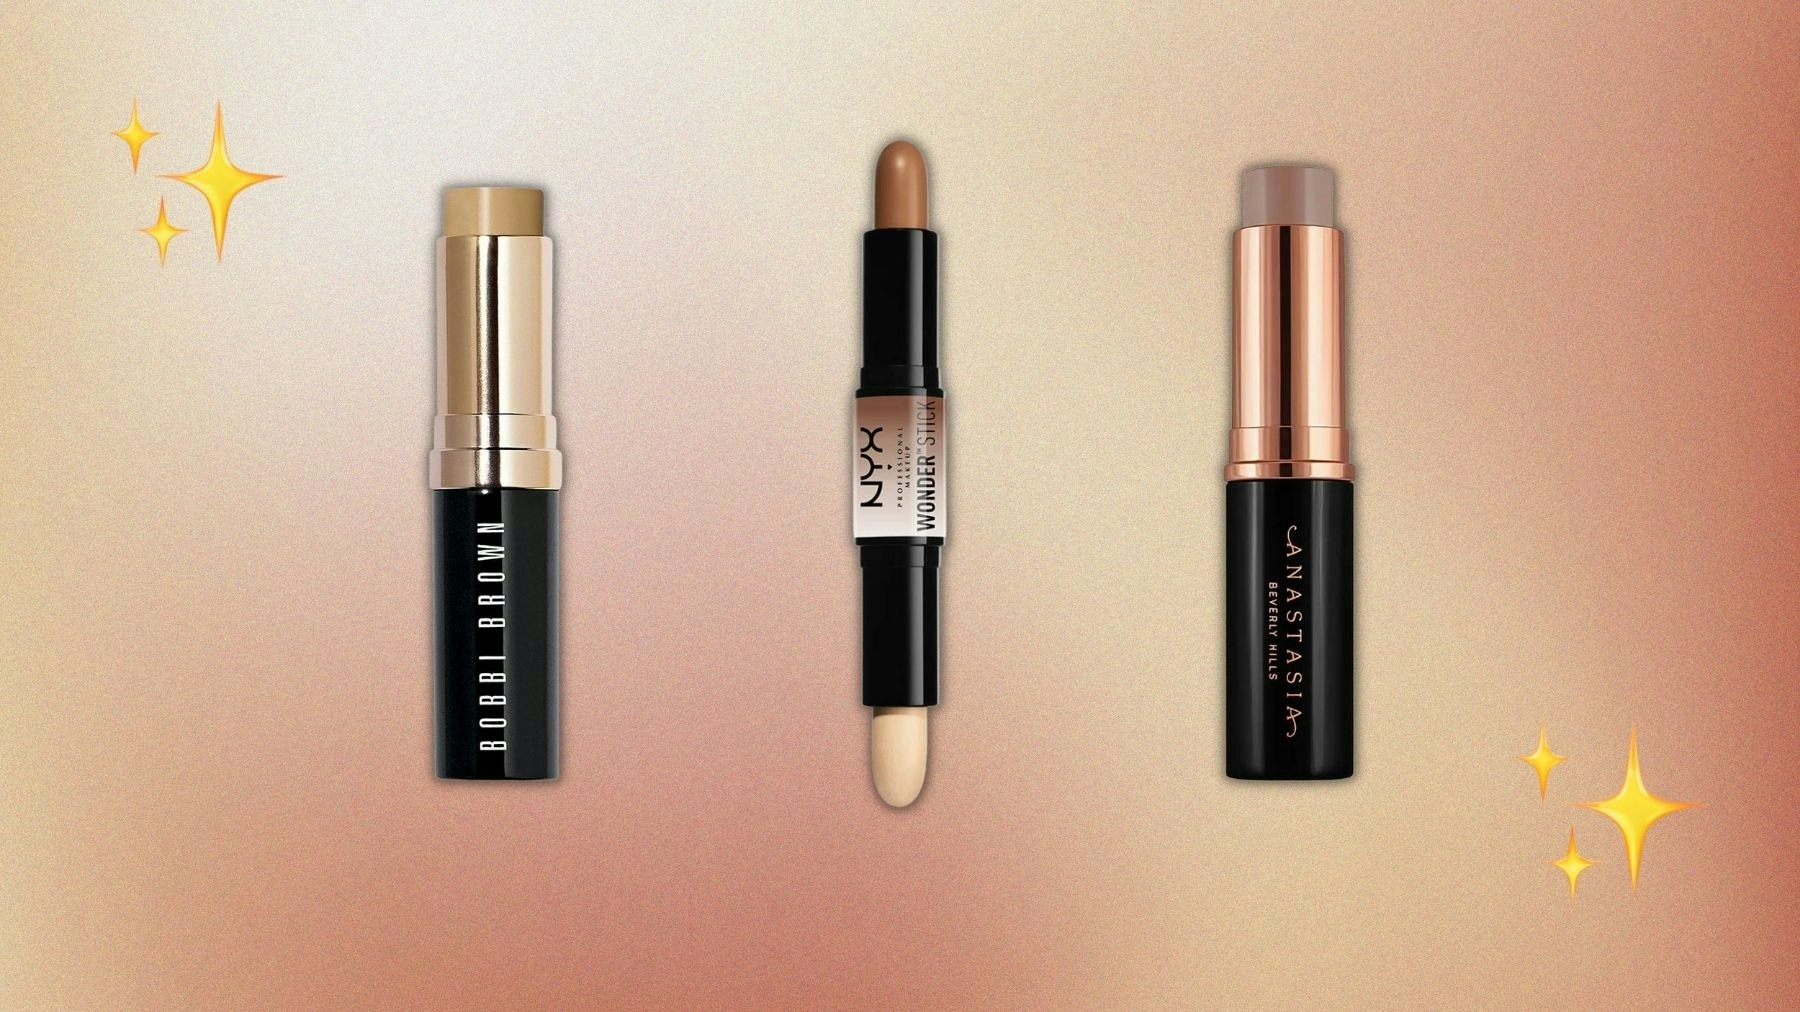 The best contour and sticks defined powerful for cheekbones